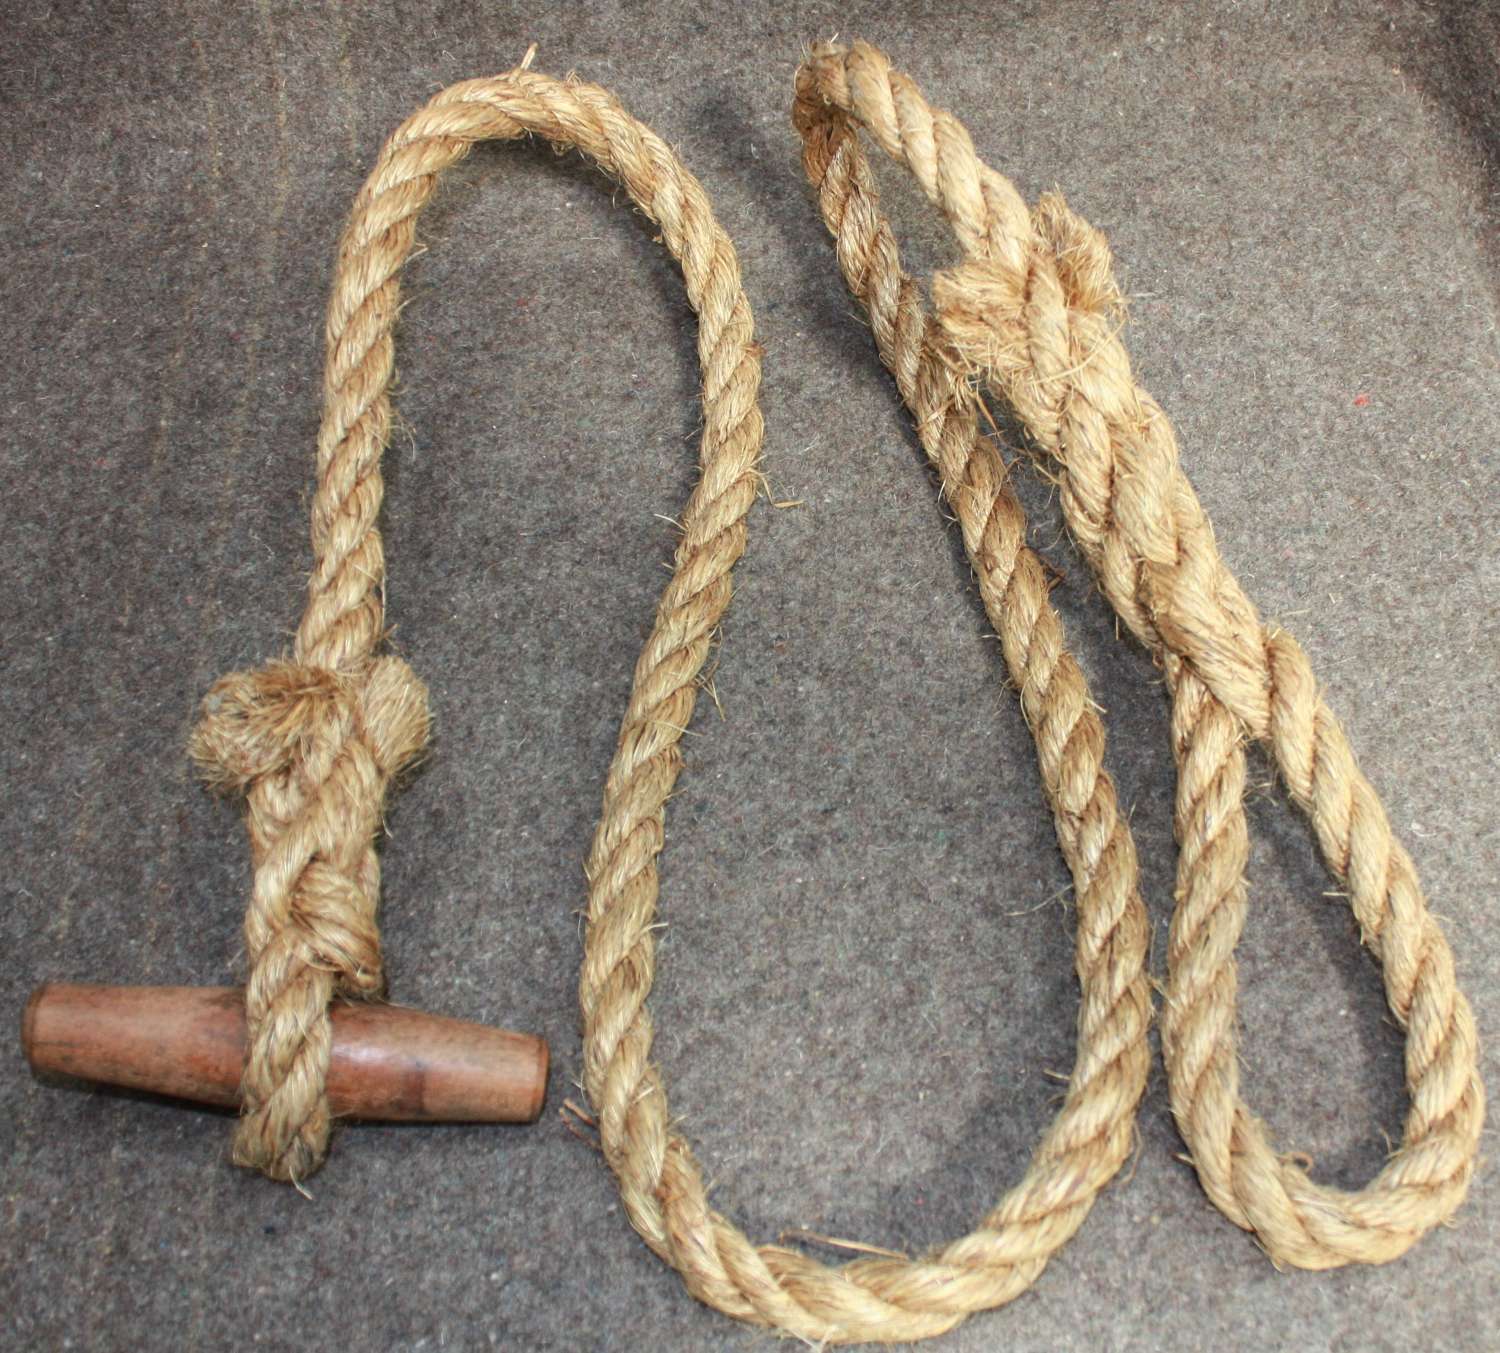 A GOOD 1944 DATED AIRBORNE FORCE THICK TOGGLE ROPE